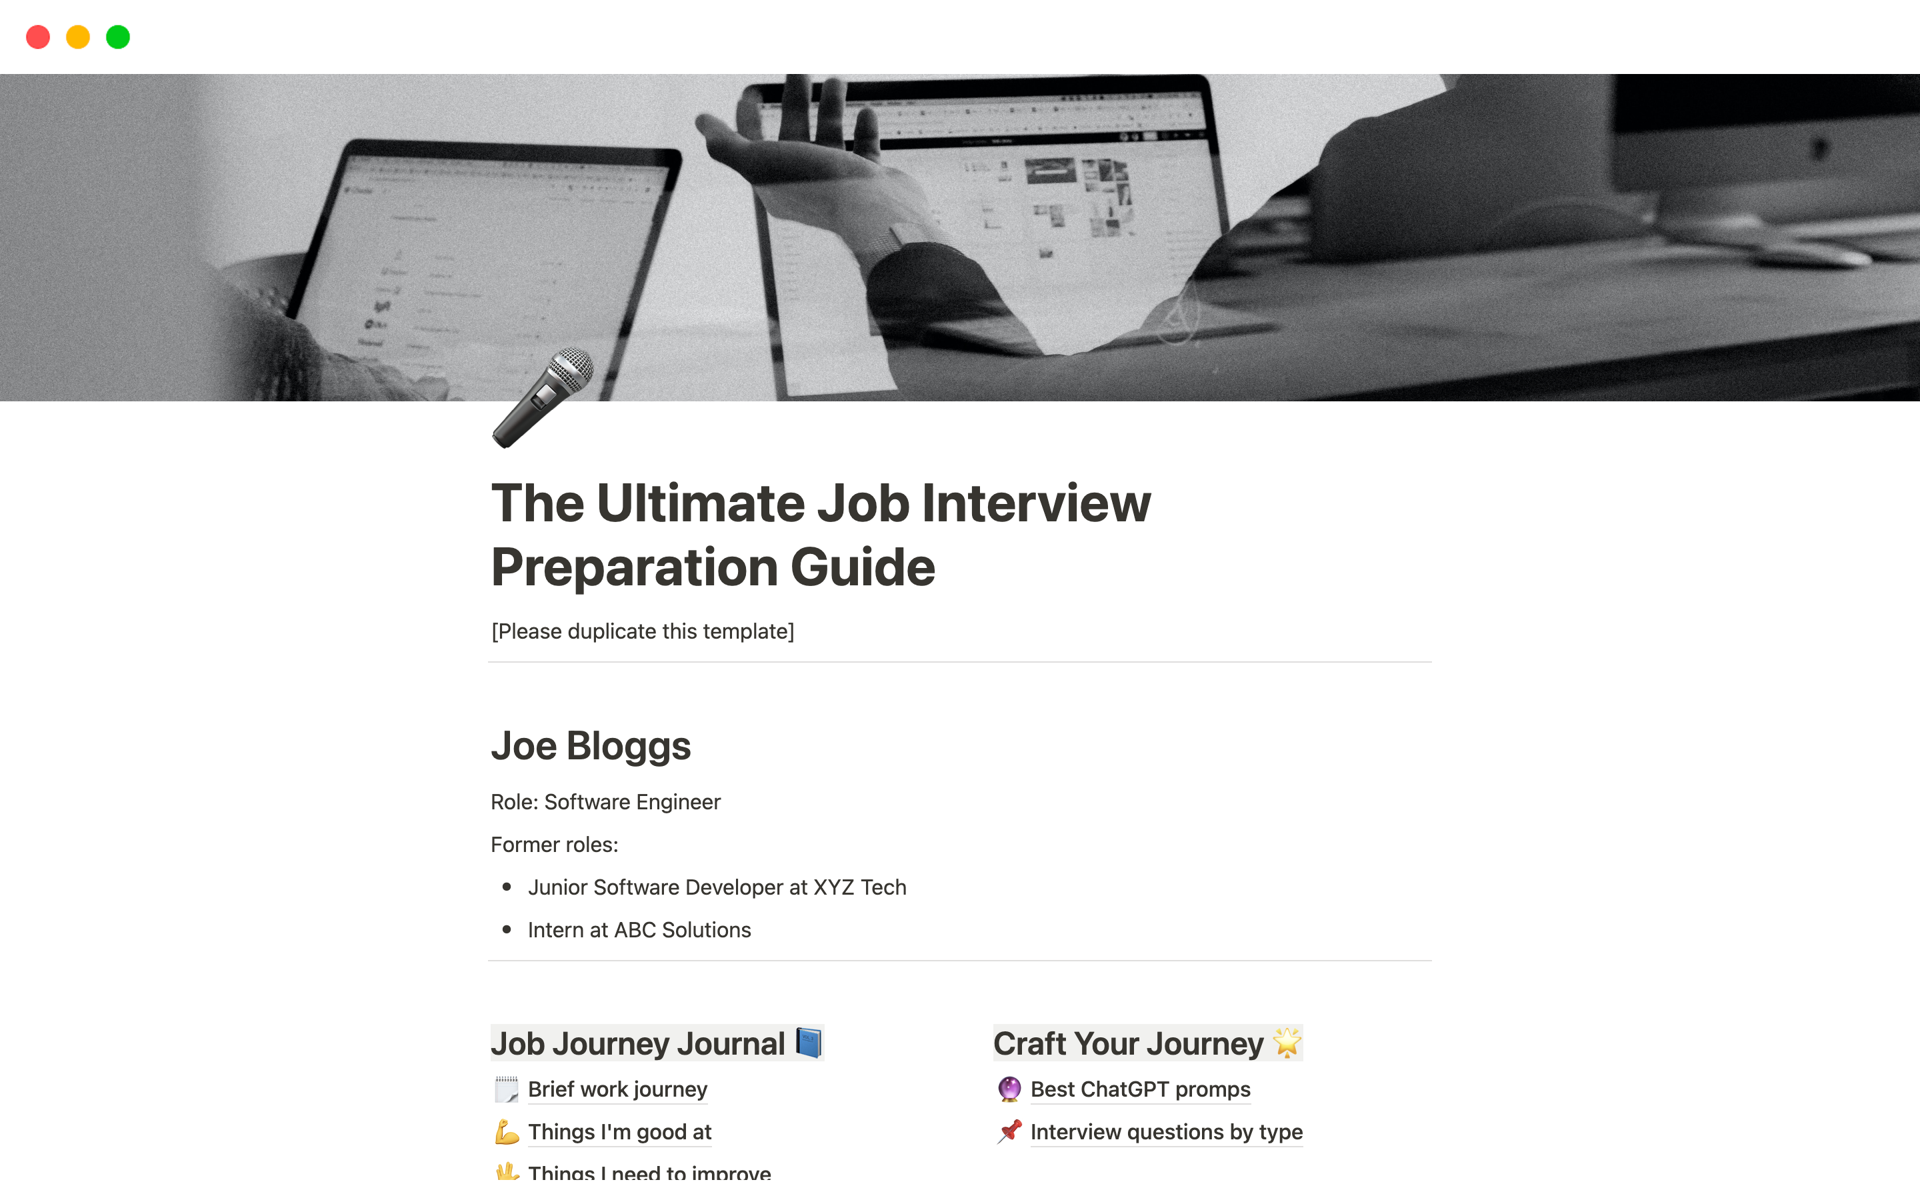 A template preview for The Ultimate Job Interview Preparation Guide